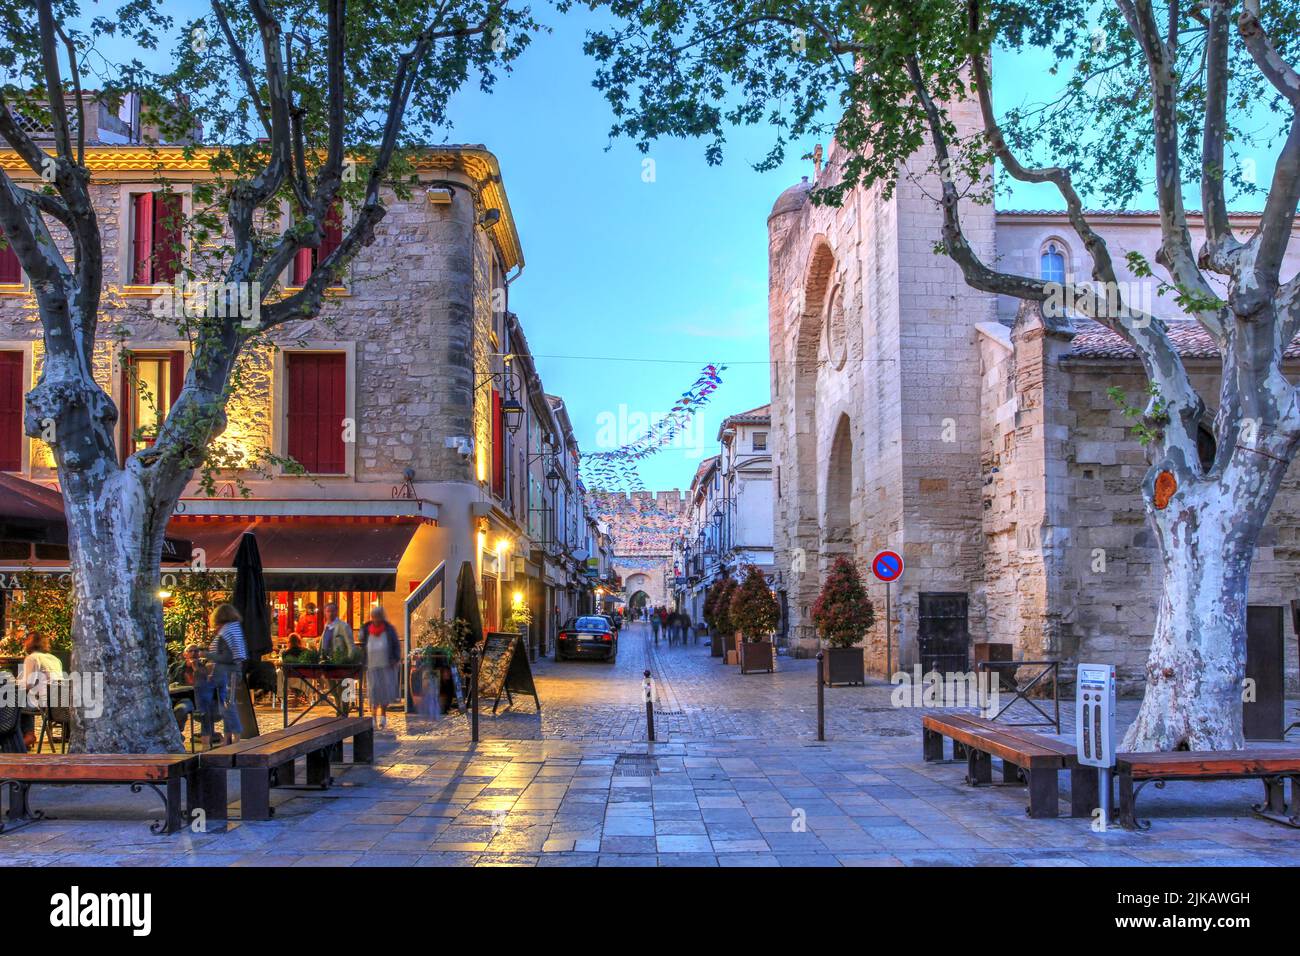 Place St-Louis at twilight within the walls of Aigues-Mortes, a medieval fortified town in the Camargue, Occitanie, south of France. Stock Photo